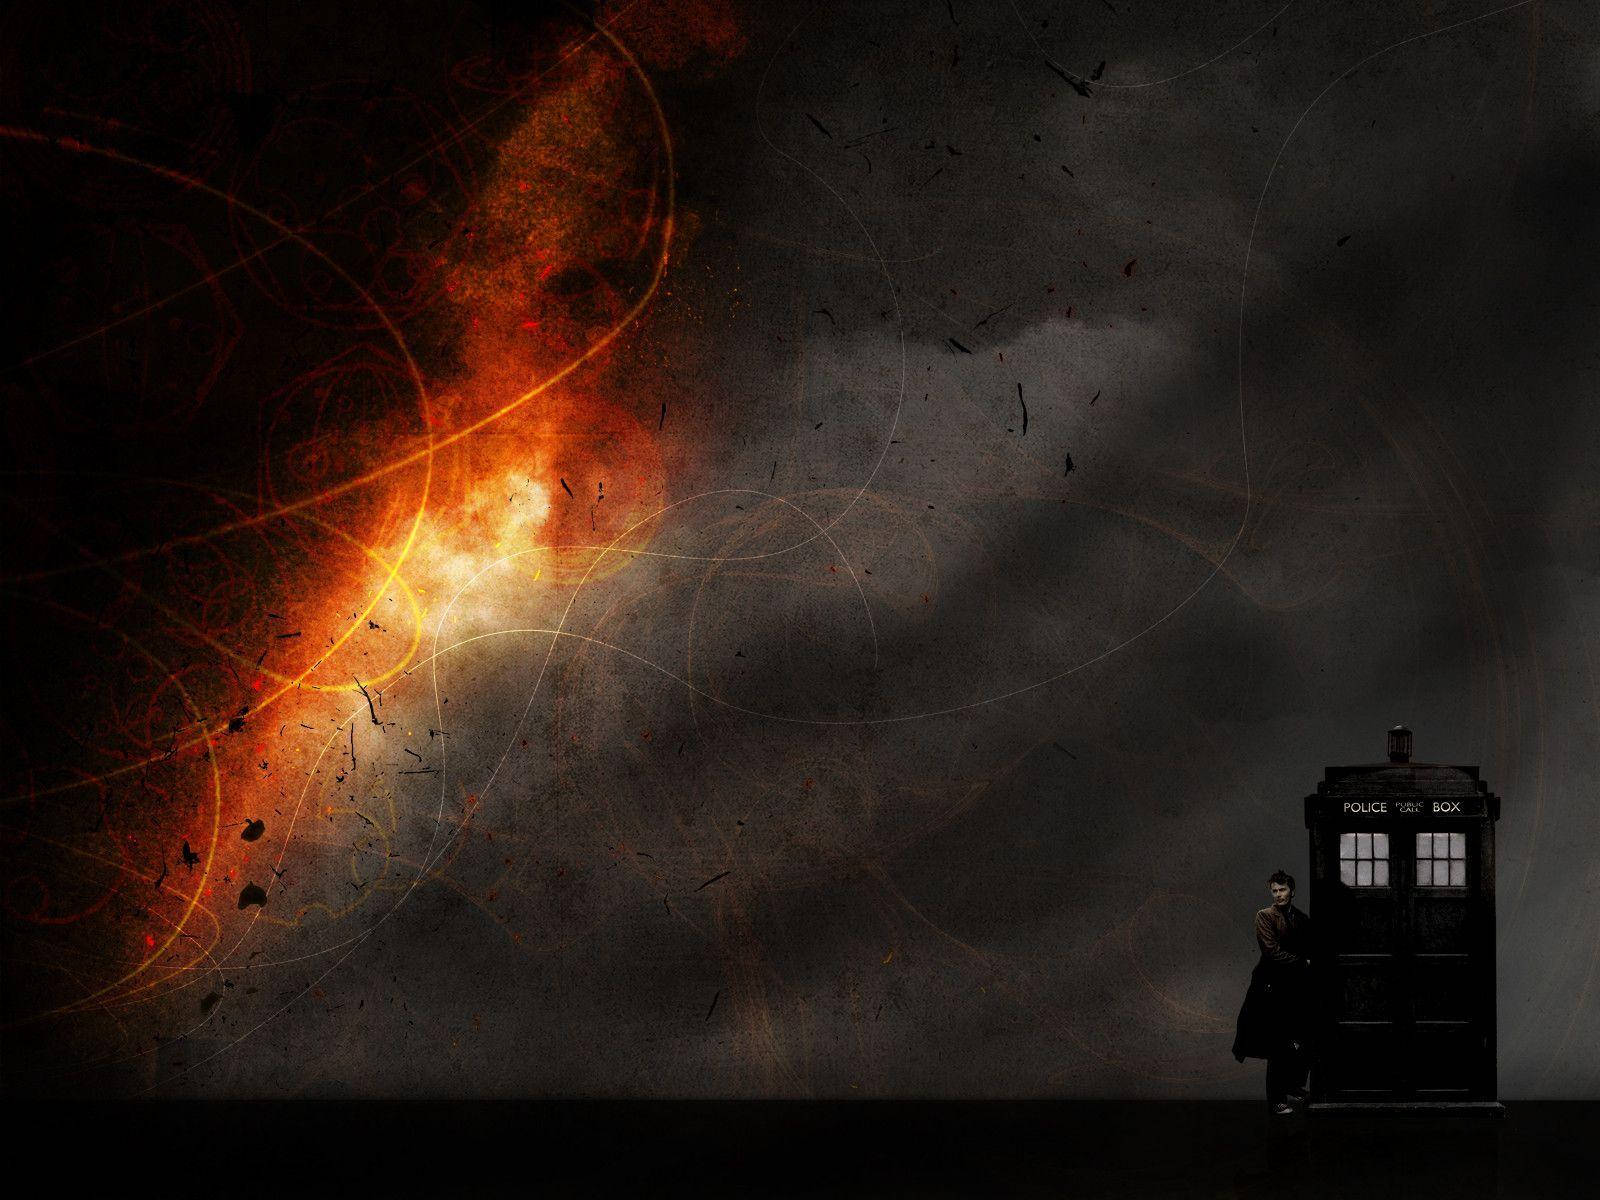 Awe-inspiring Snapshot Of The Iconic Doctor Who Time Machine, Tardis, In Hd Quality. Background